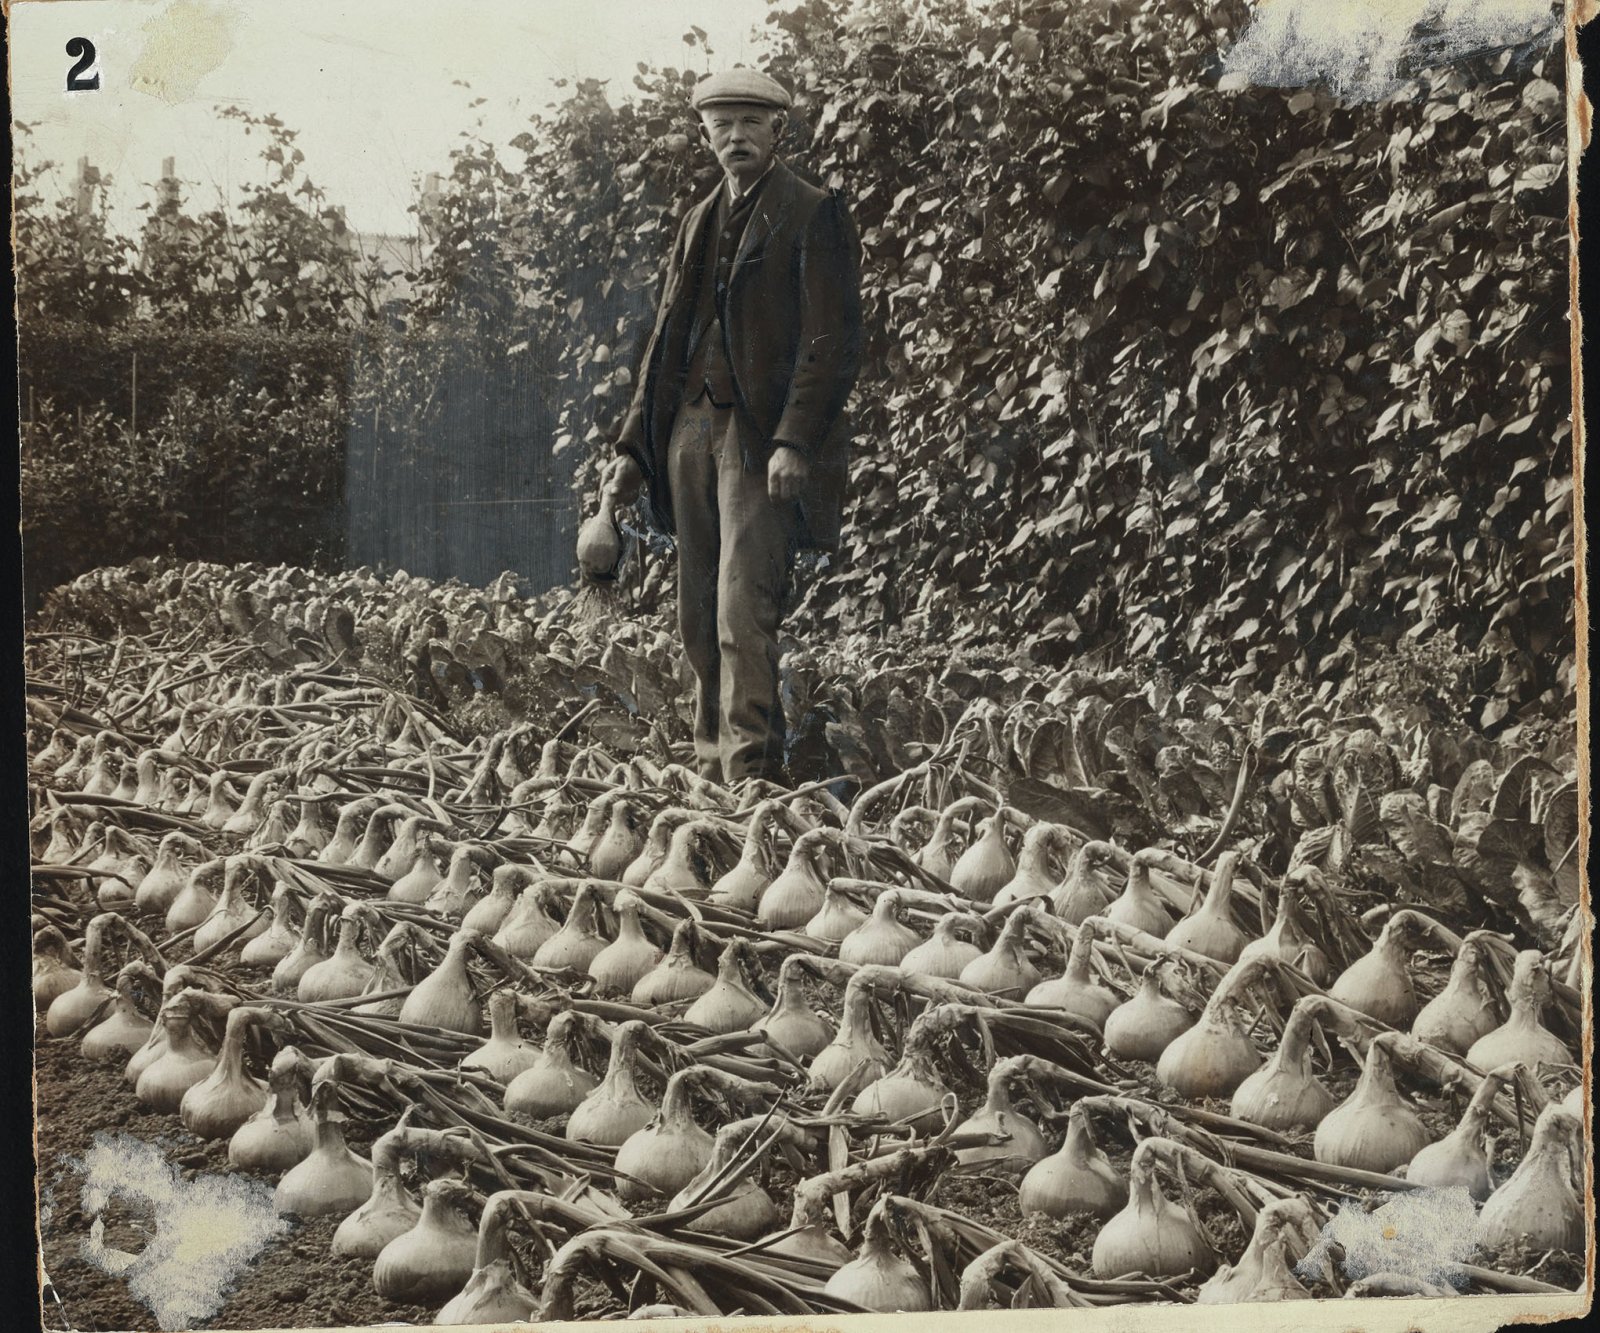 black and white image of man in an onion allotment